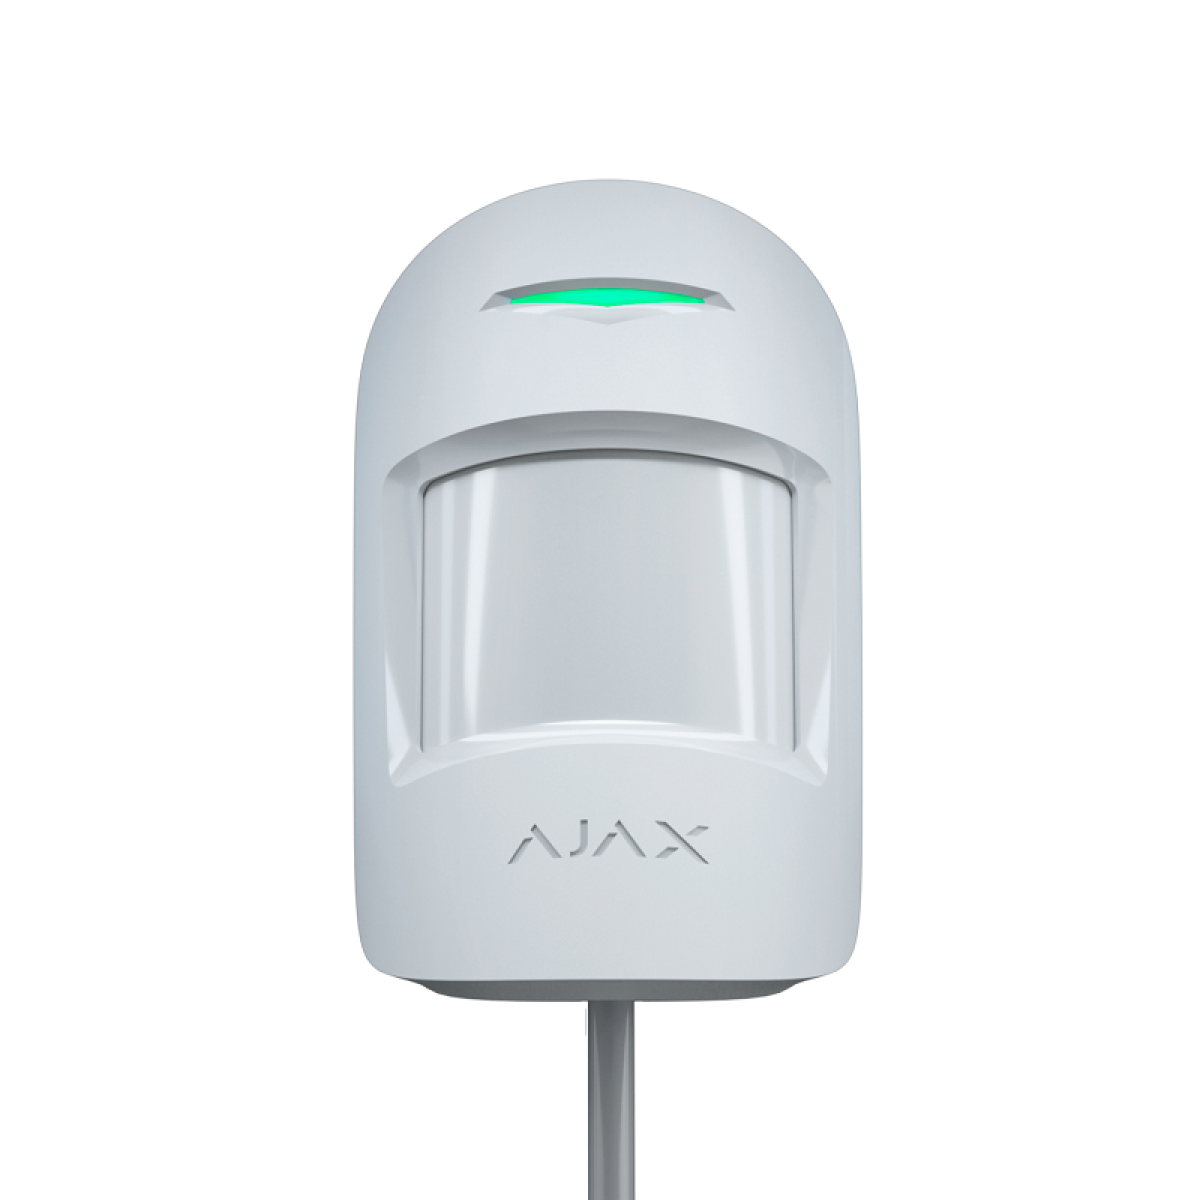 Ajax MotionProtect Fibra Wired indoor motion detector White